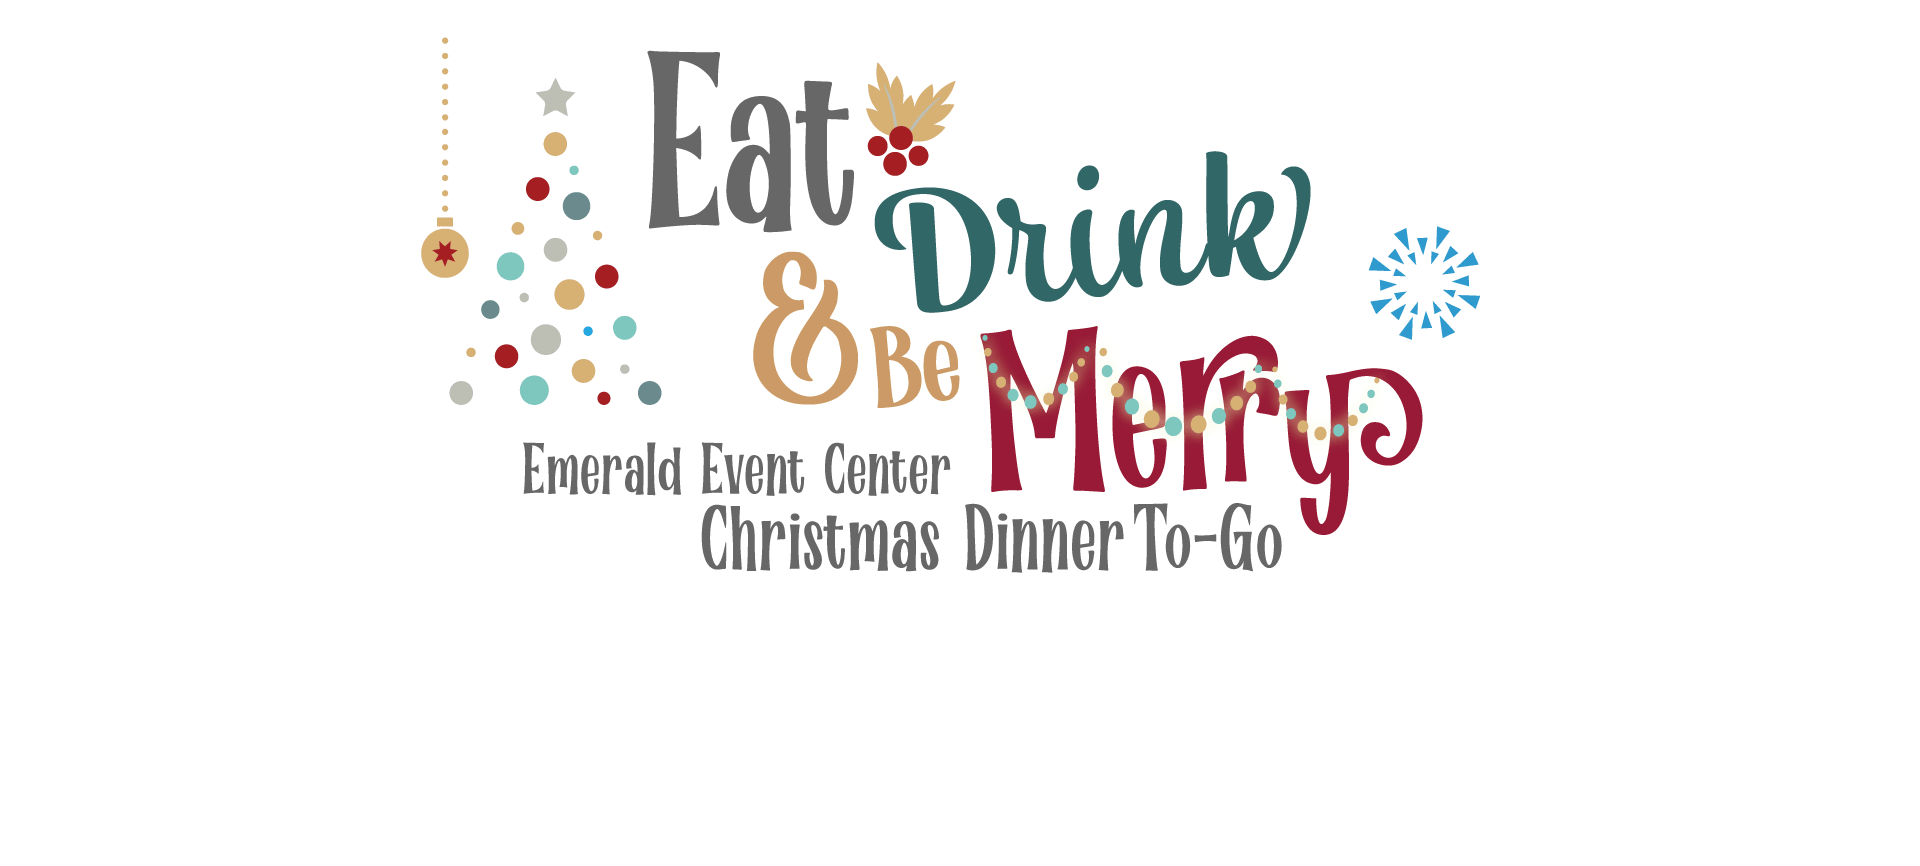 Eat, Drink and Be Merry! Christmas Dinner To-Go 2021